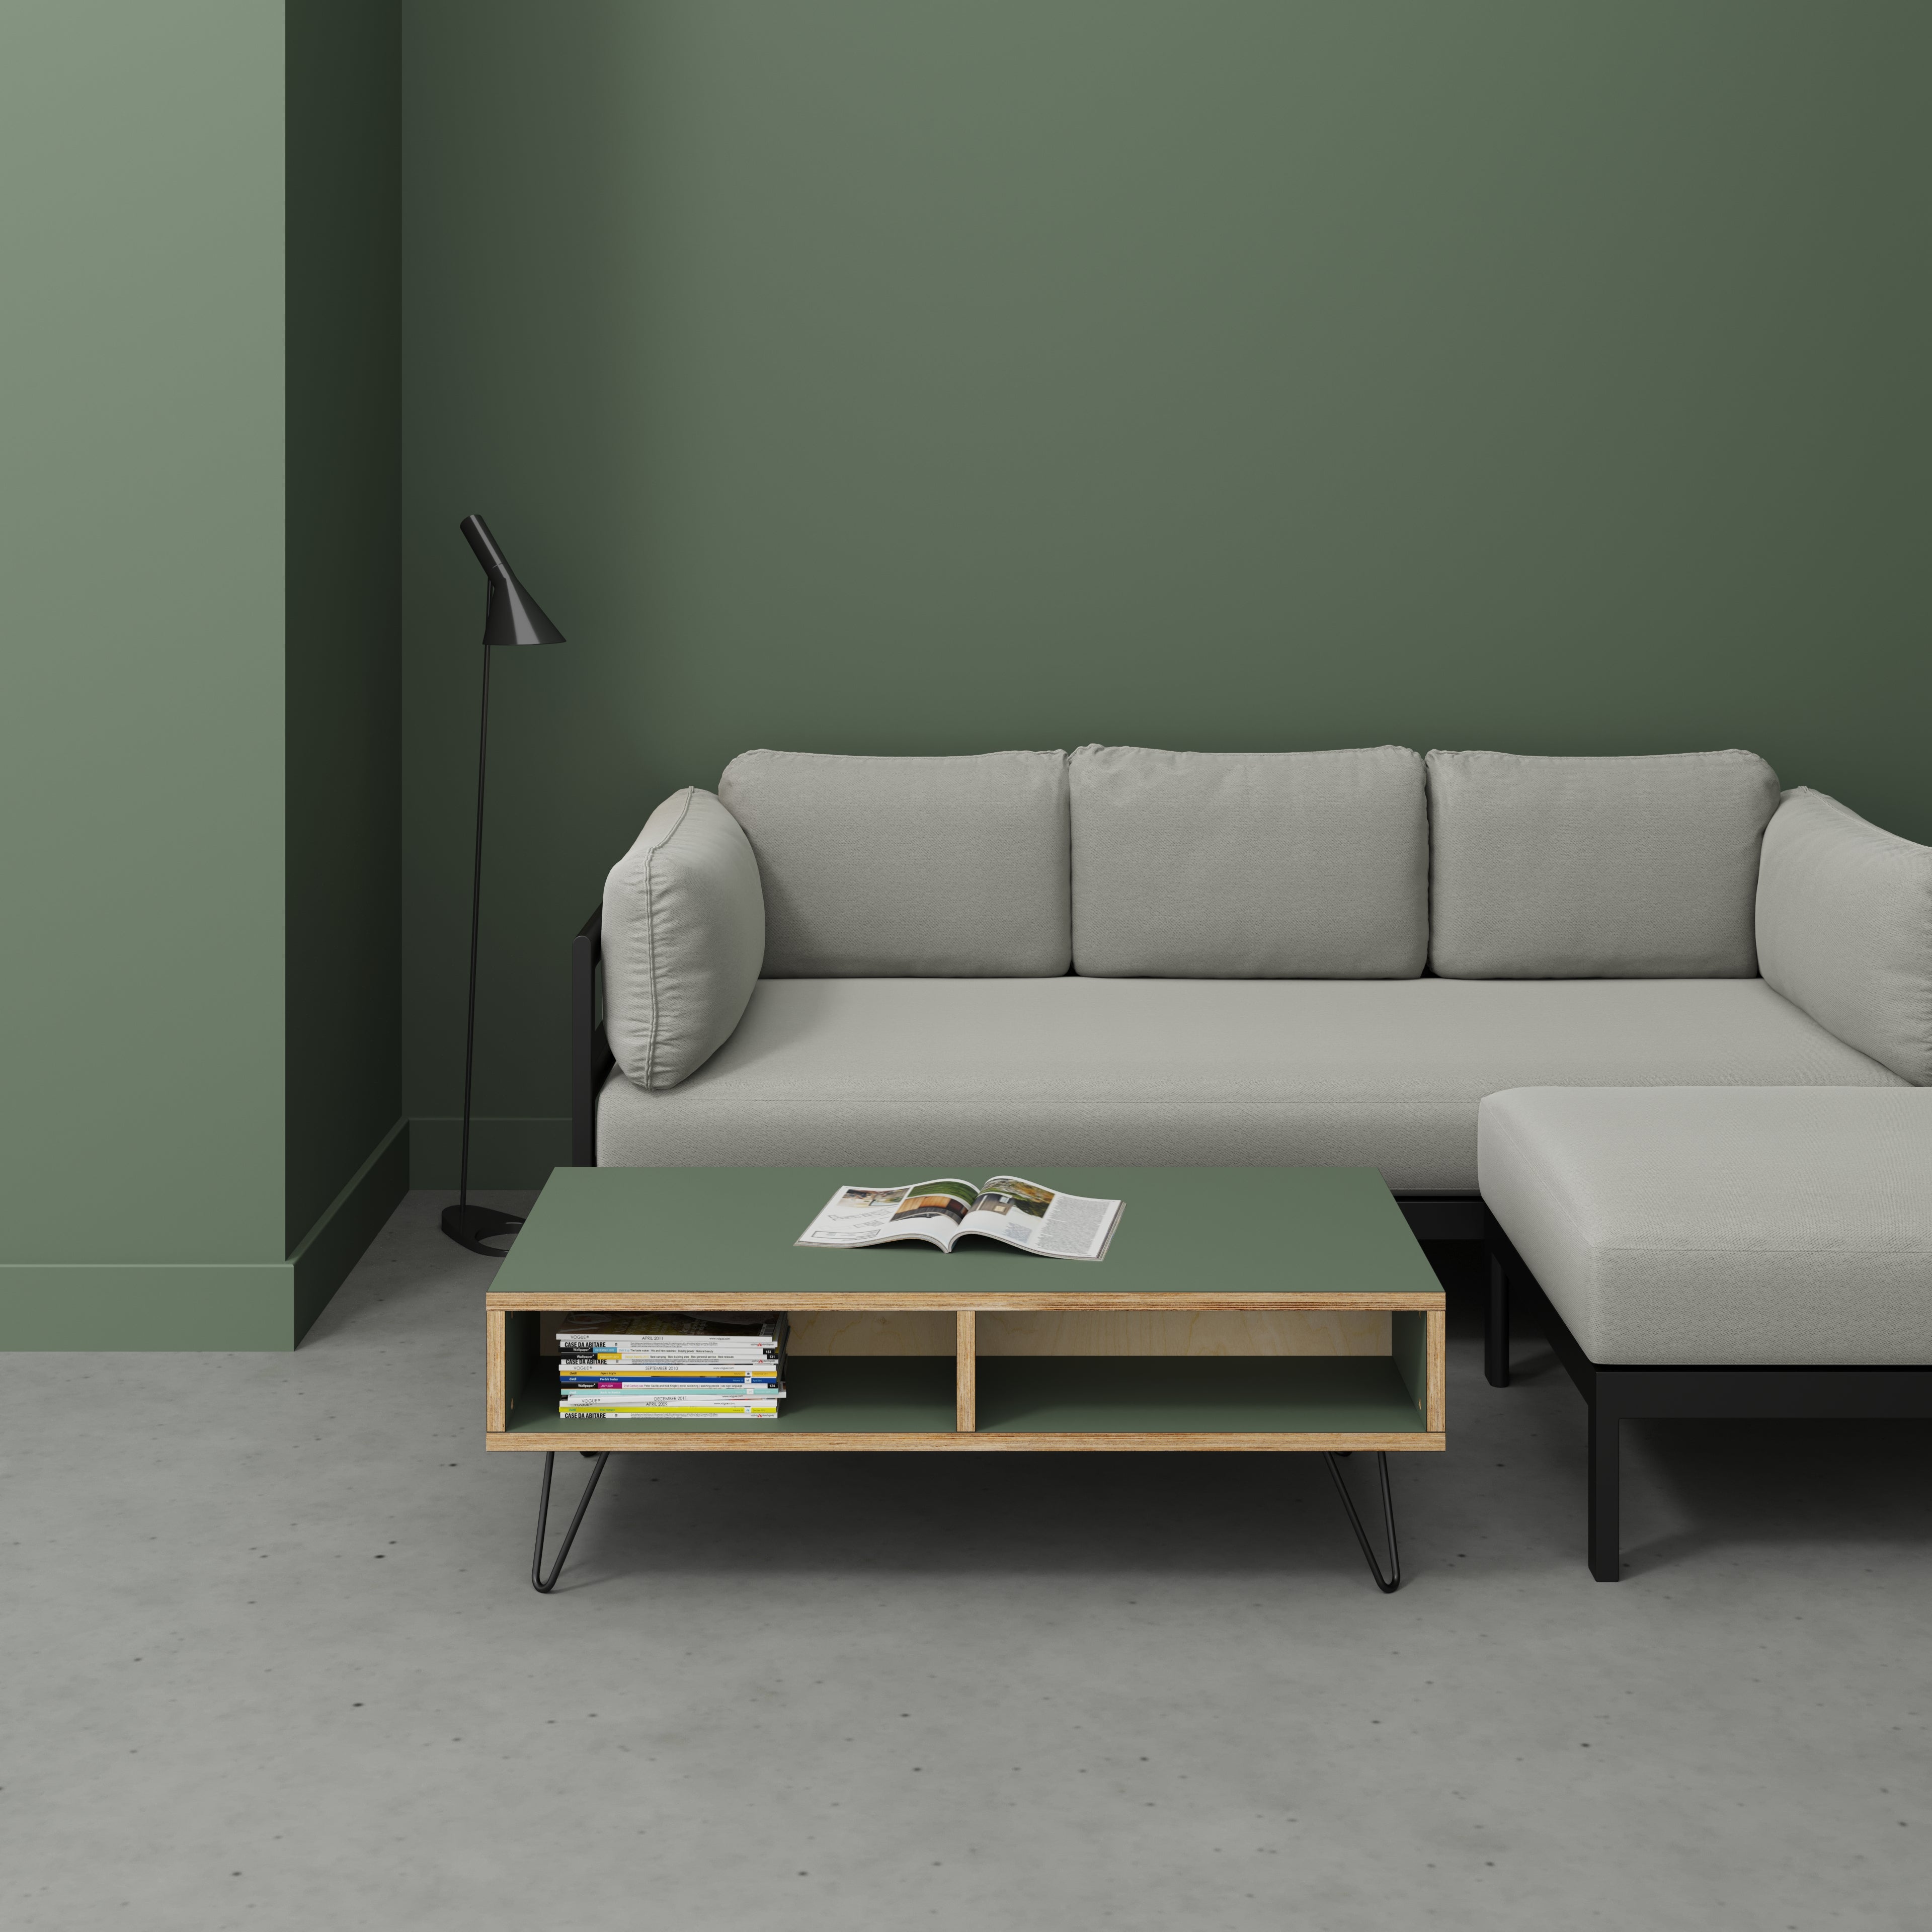 Coffee Table with Box Storage and Black Hairpin Legs - Formica Green Slate - 1200(w) x 600(d) x 400(h)